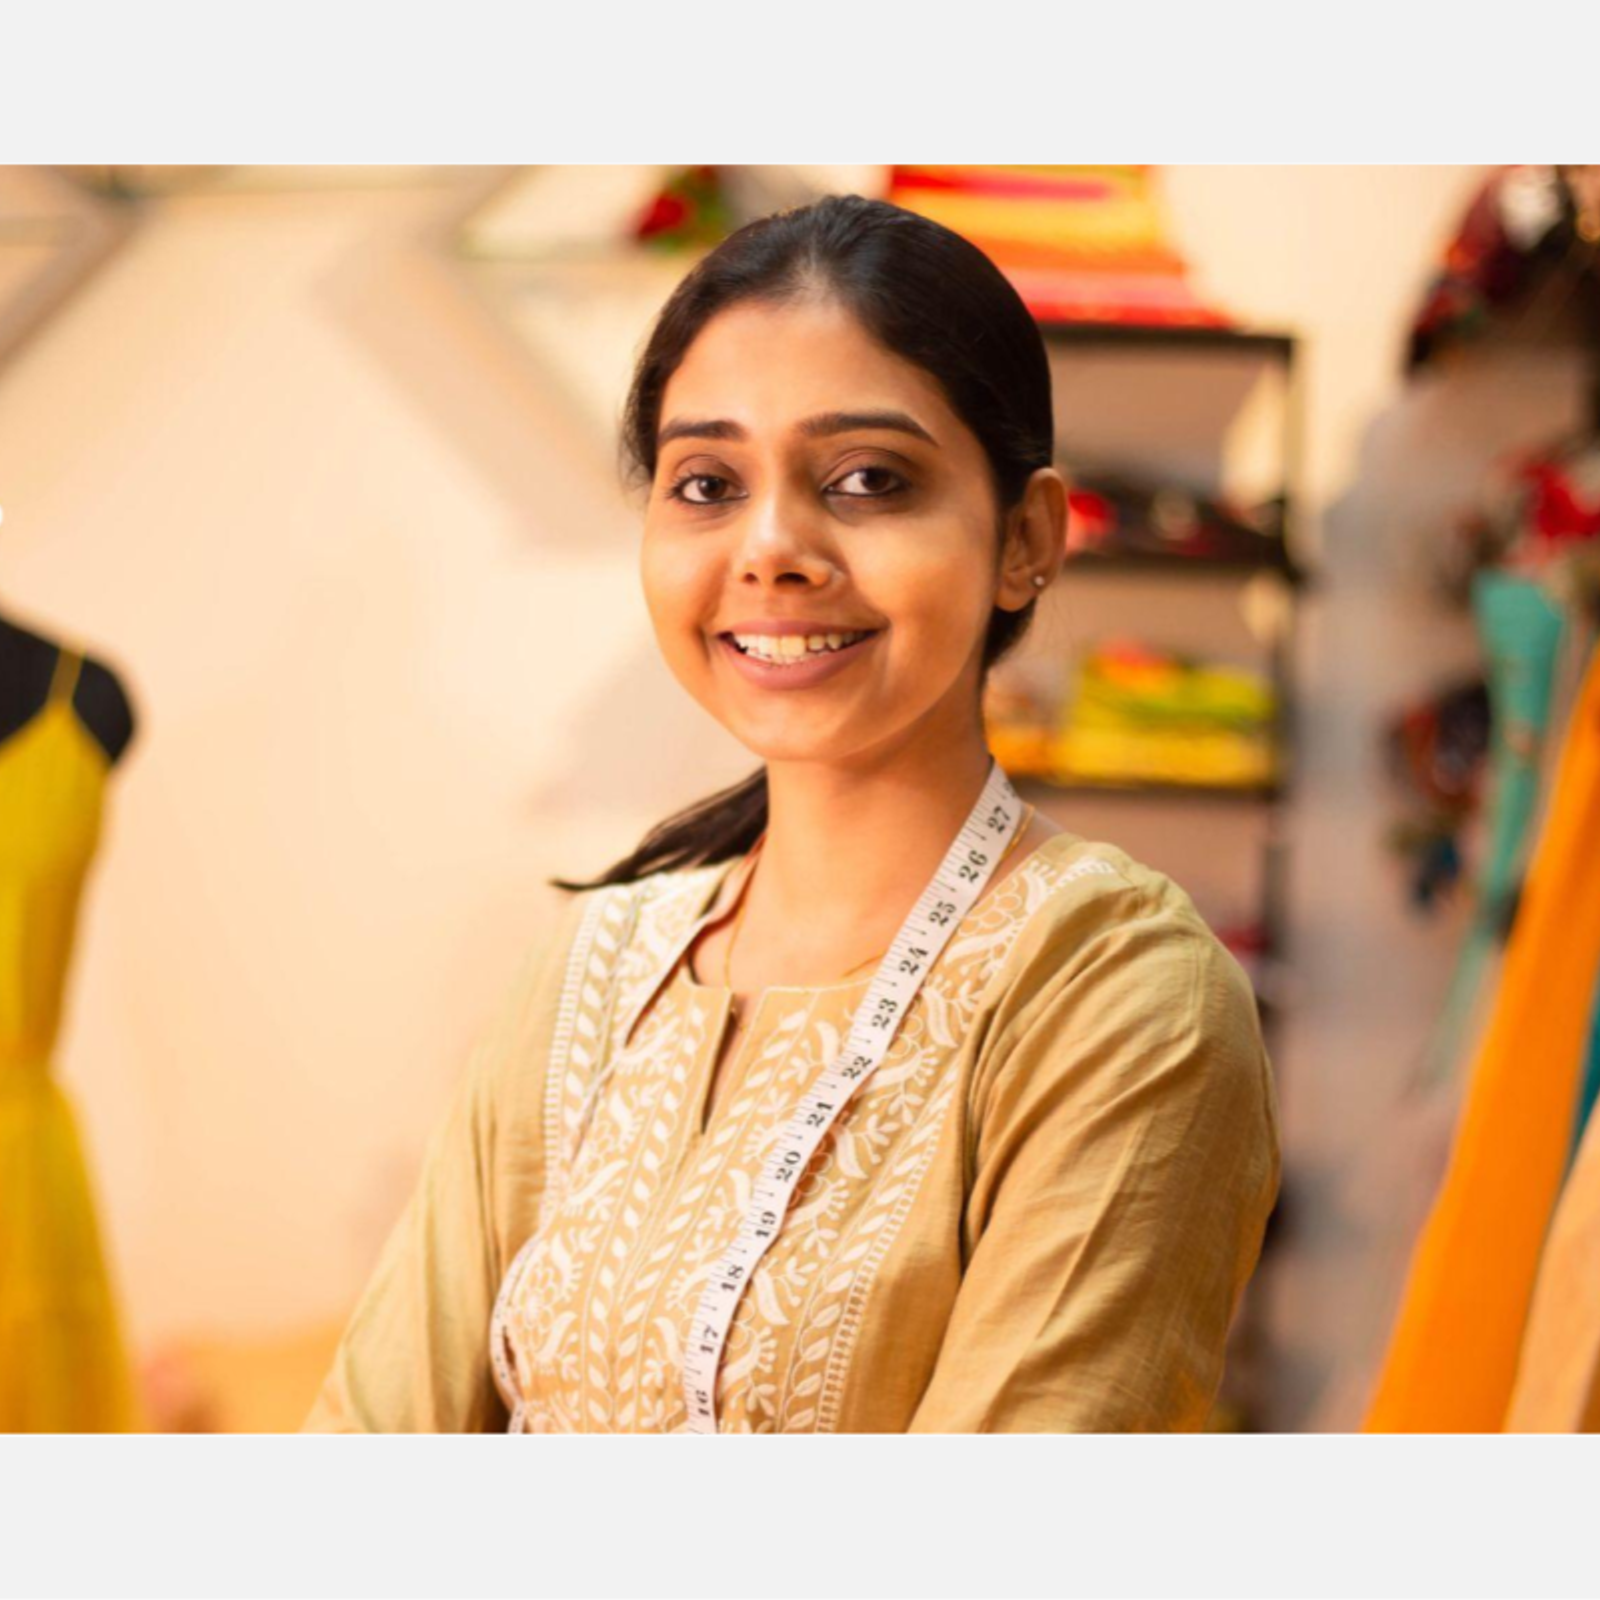 How to start an online fashion business with Rs 10,000 initial investment